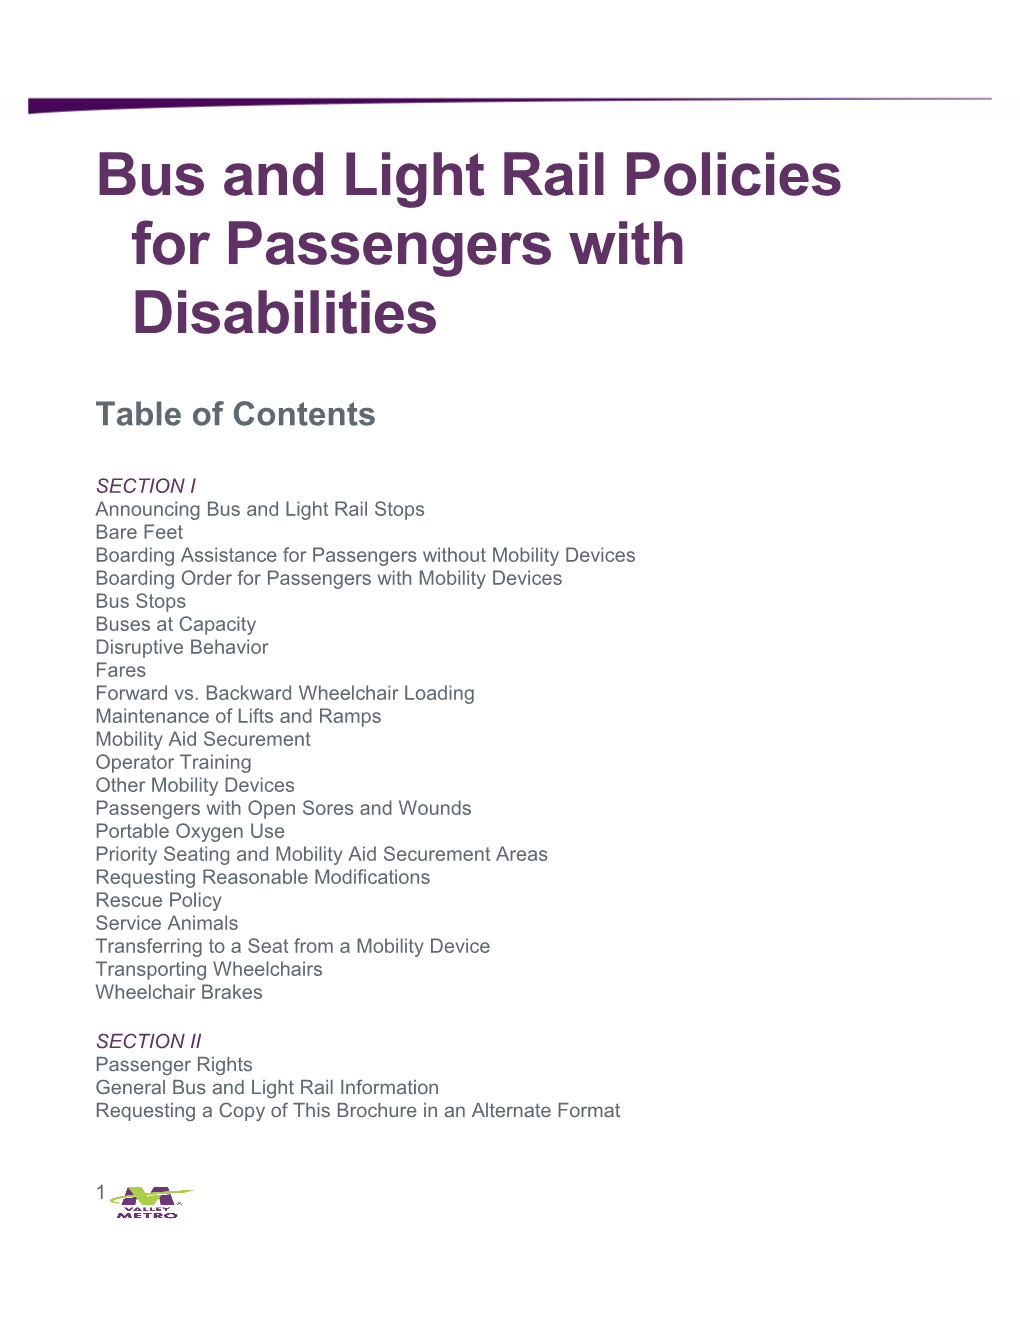 Bus and Light Rail Policies for Passengers with Disabilities